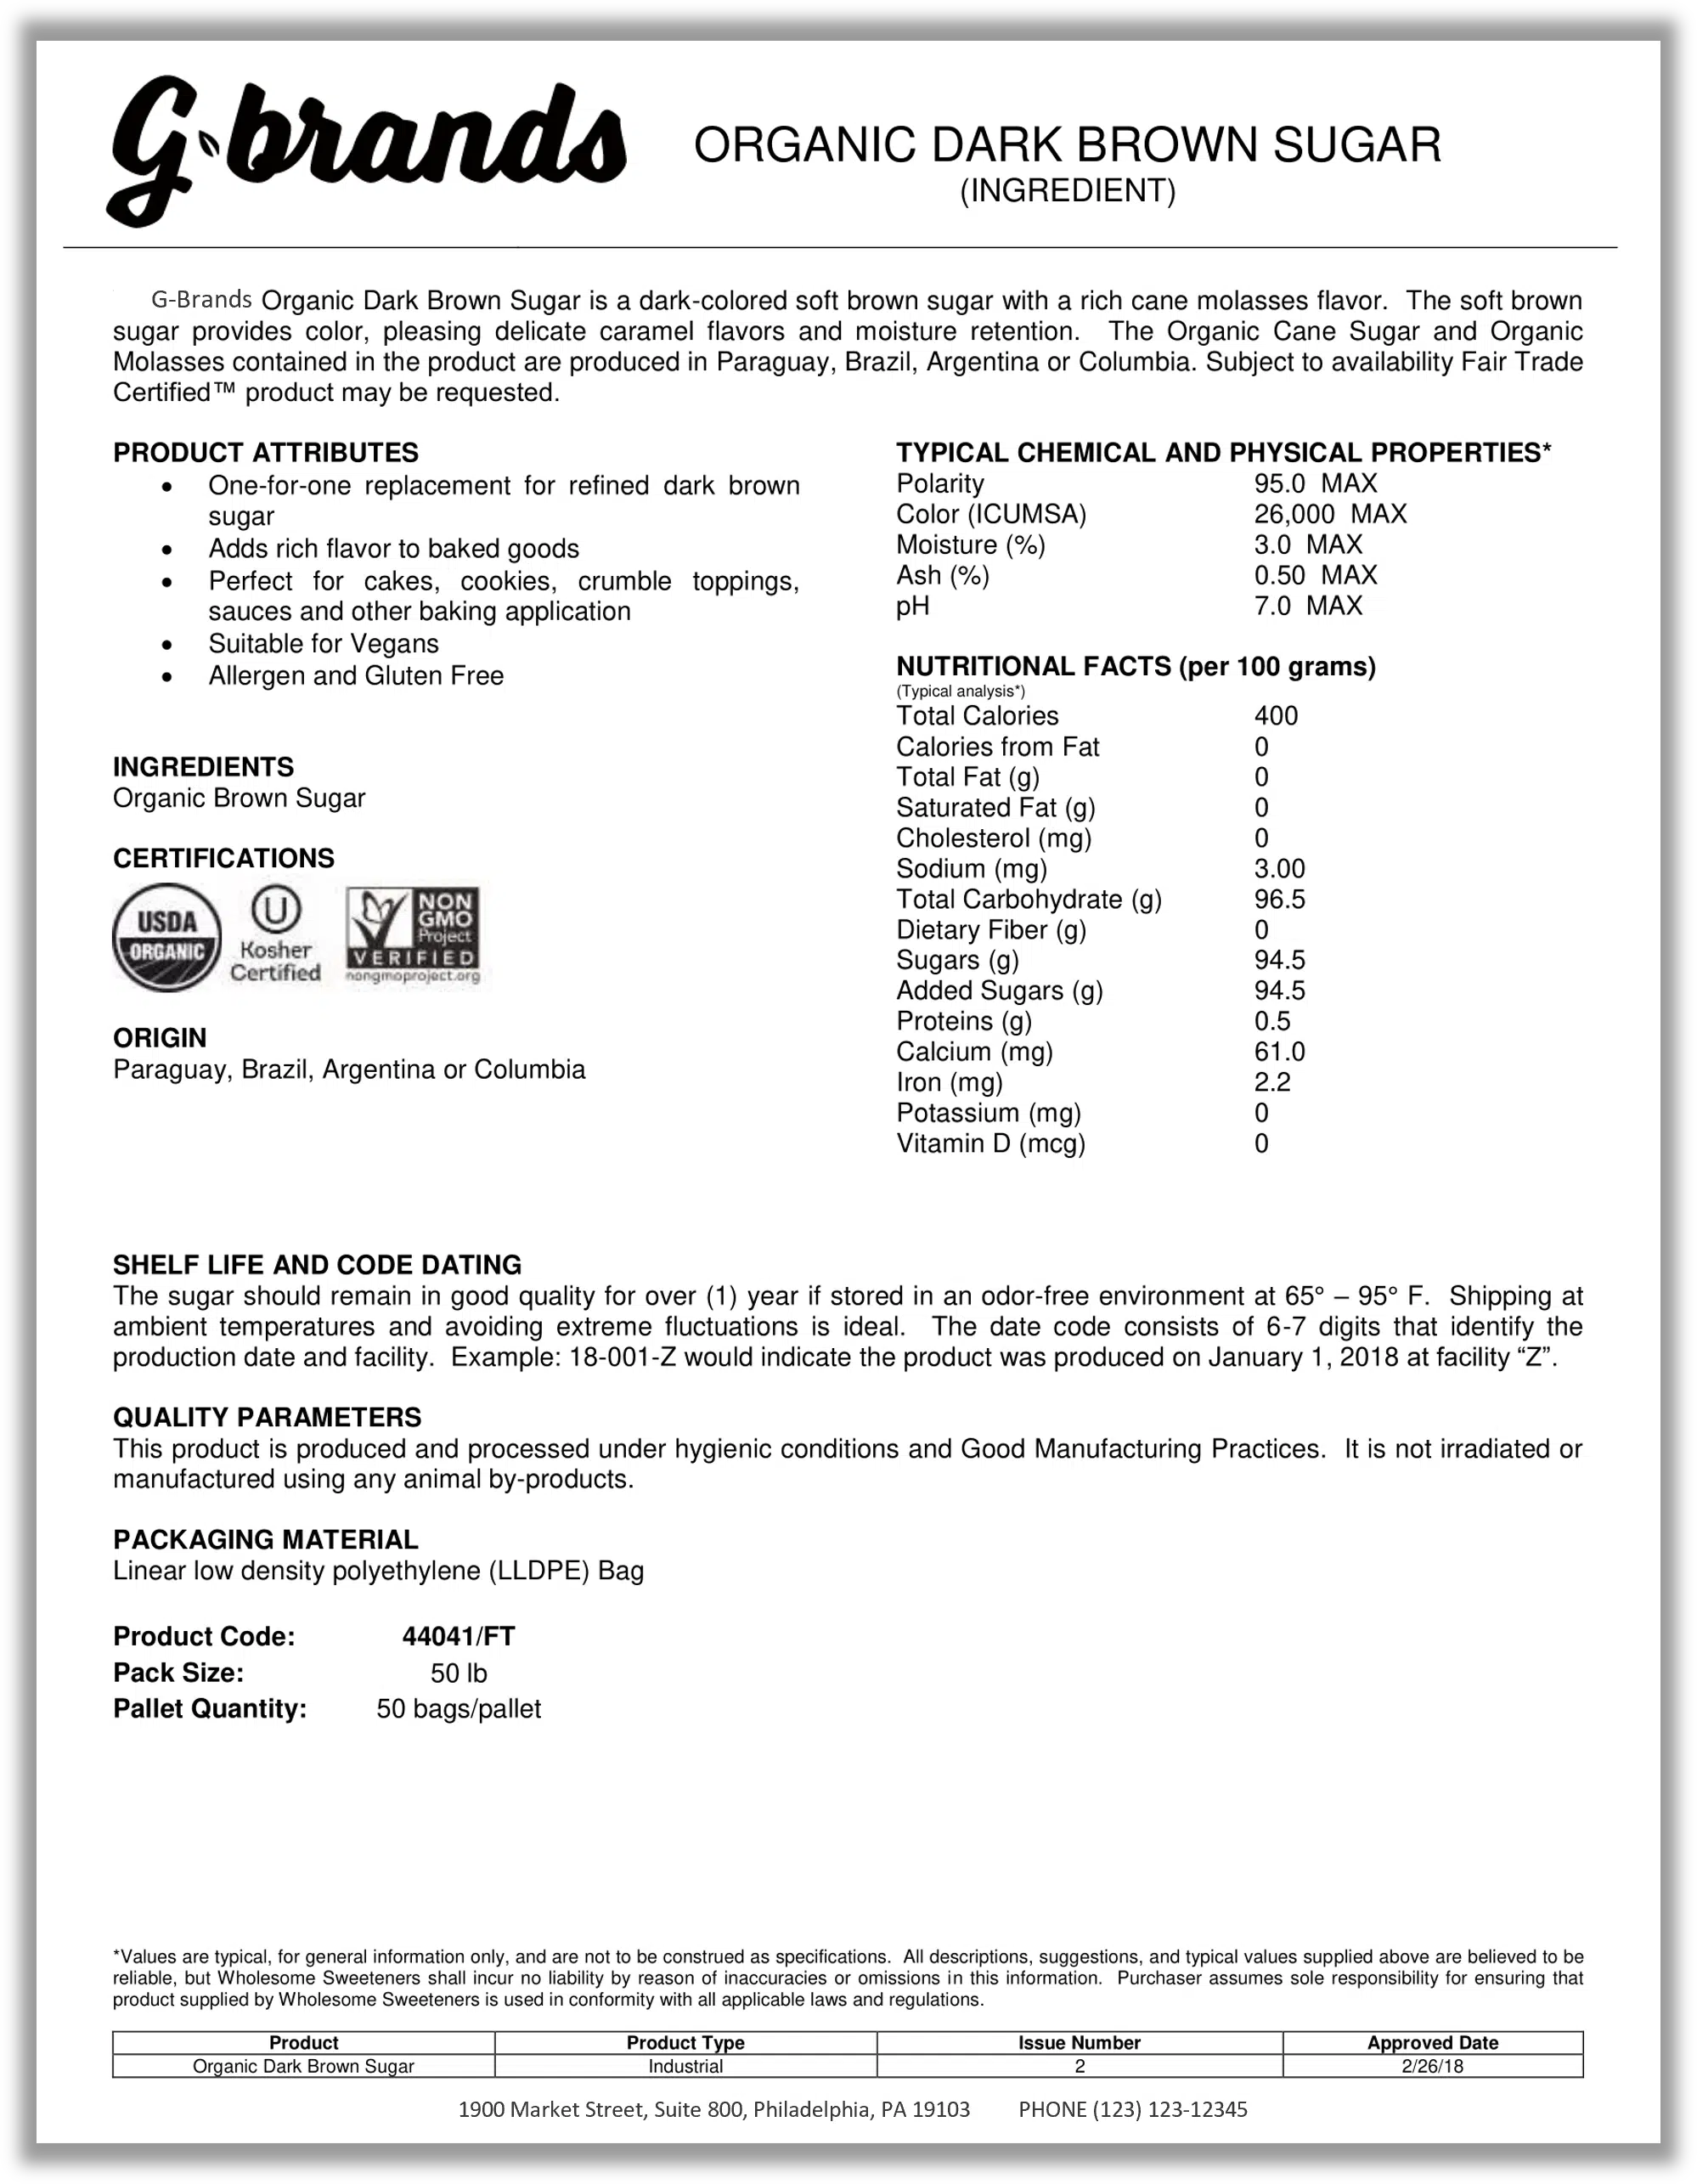 Example Technical Sheet